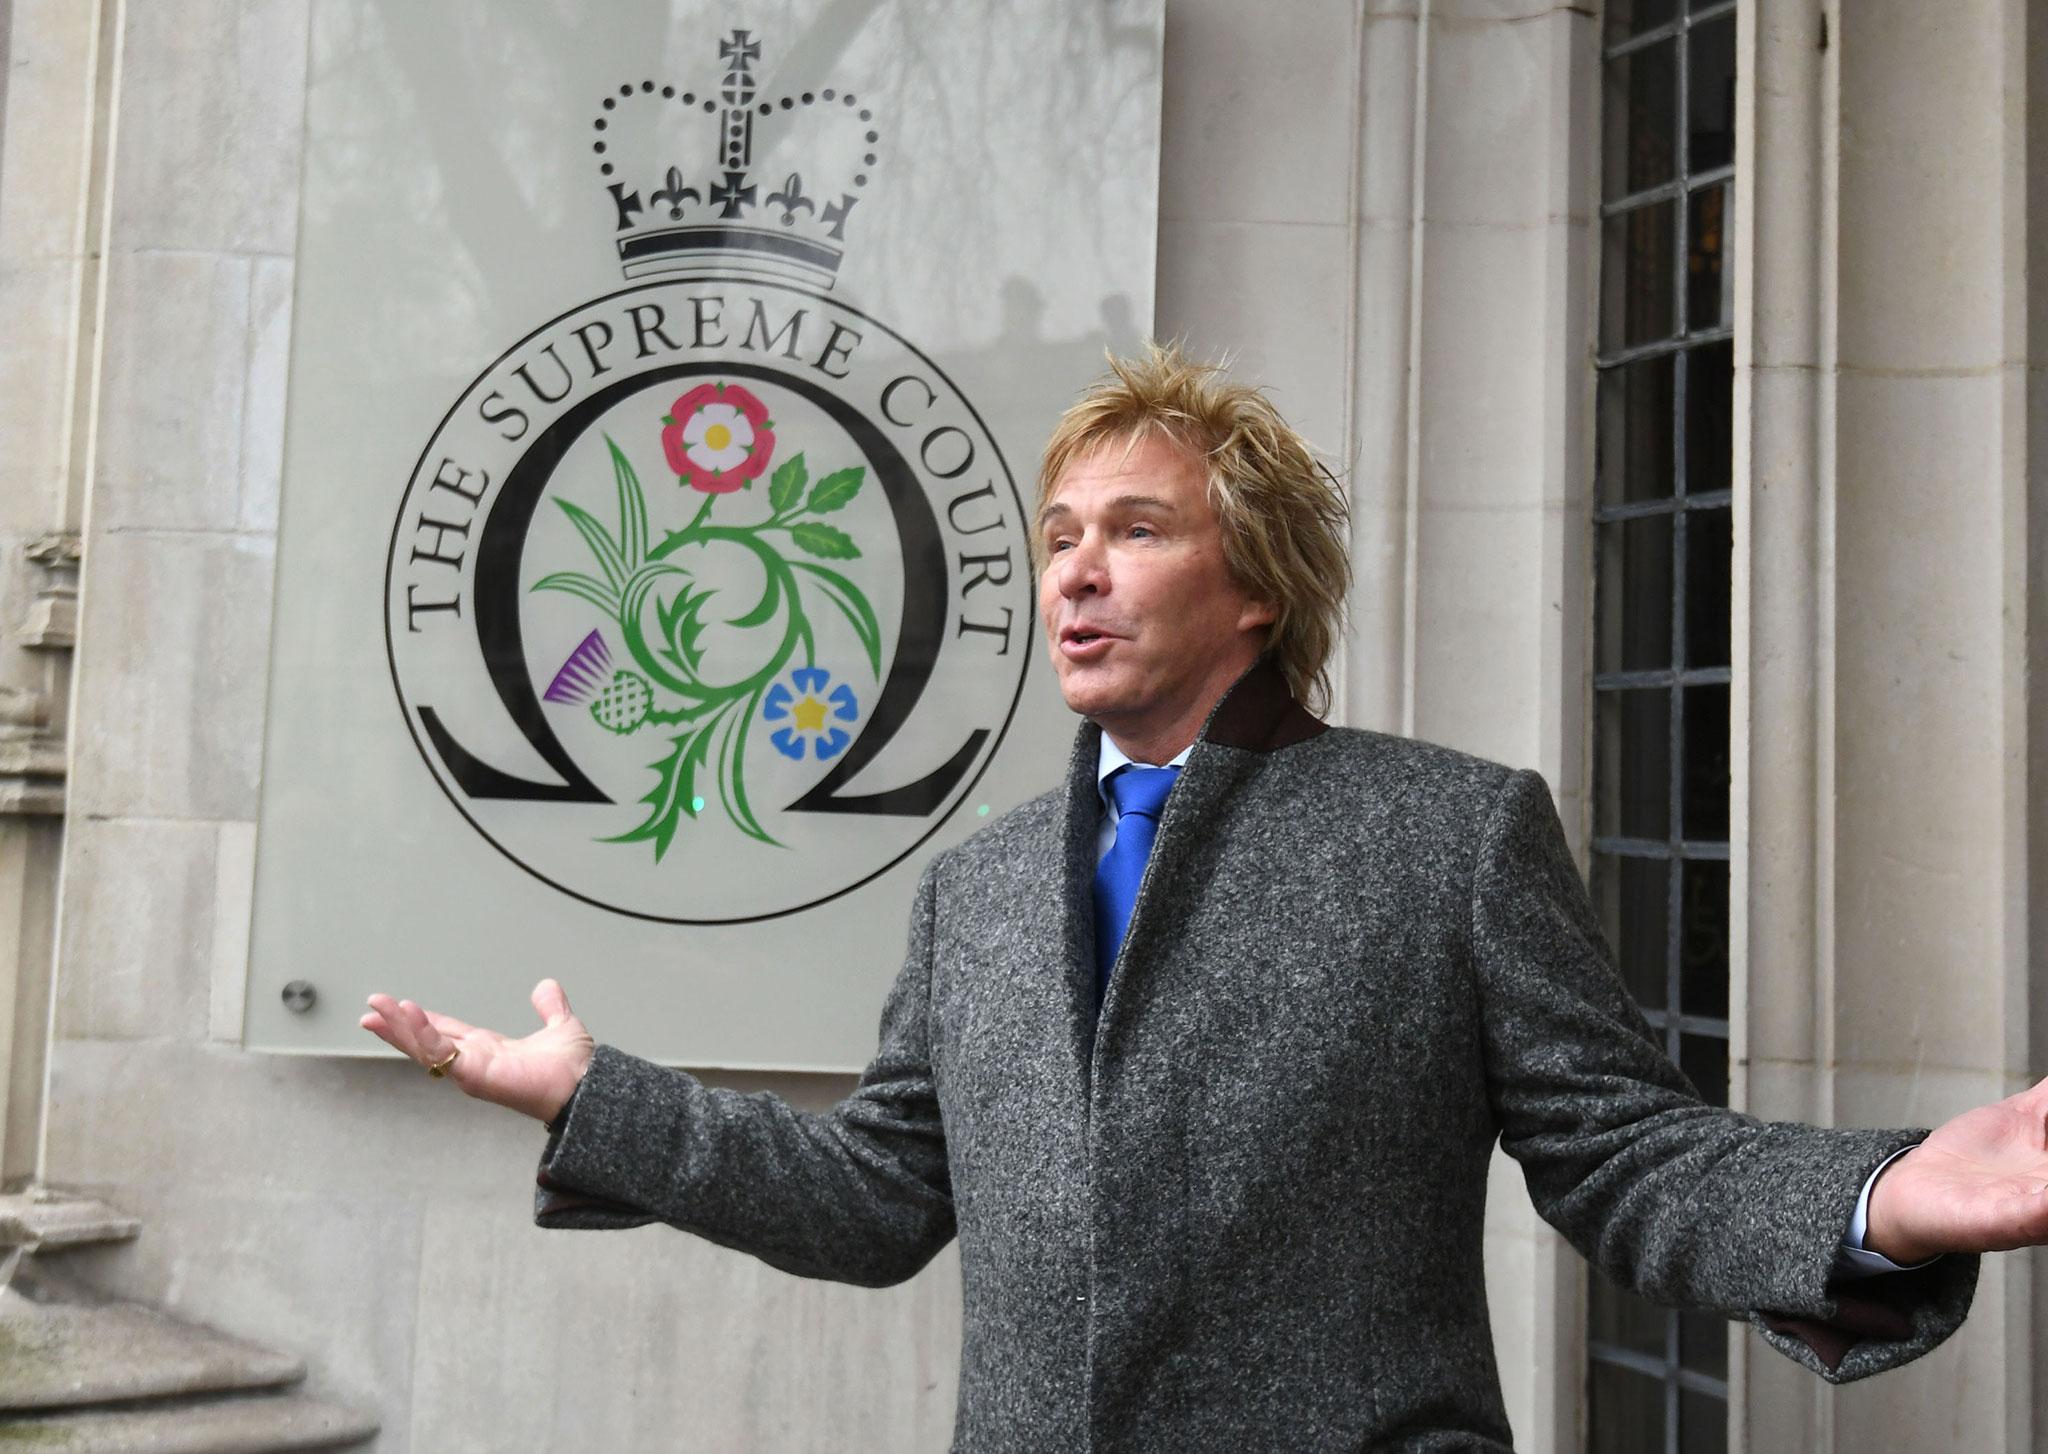 Pimlico Plumbers founder Charlie Mullins outside the Supreme Court as the case began on Tuesday